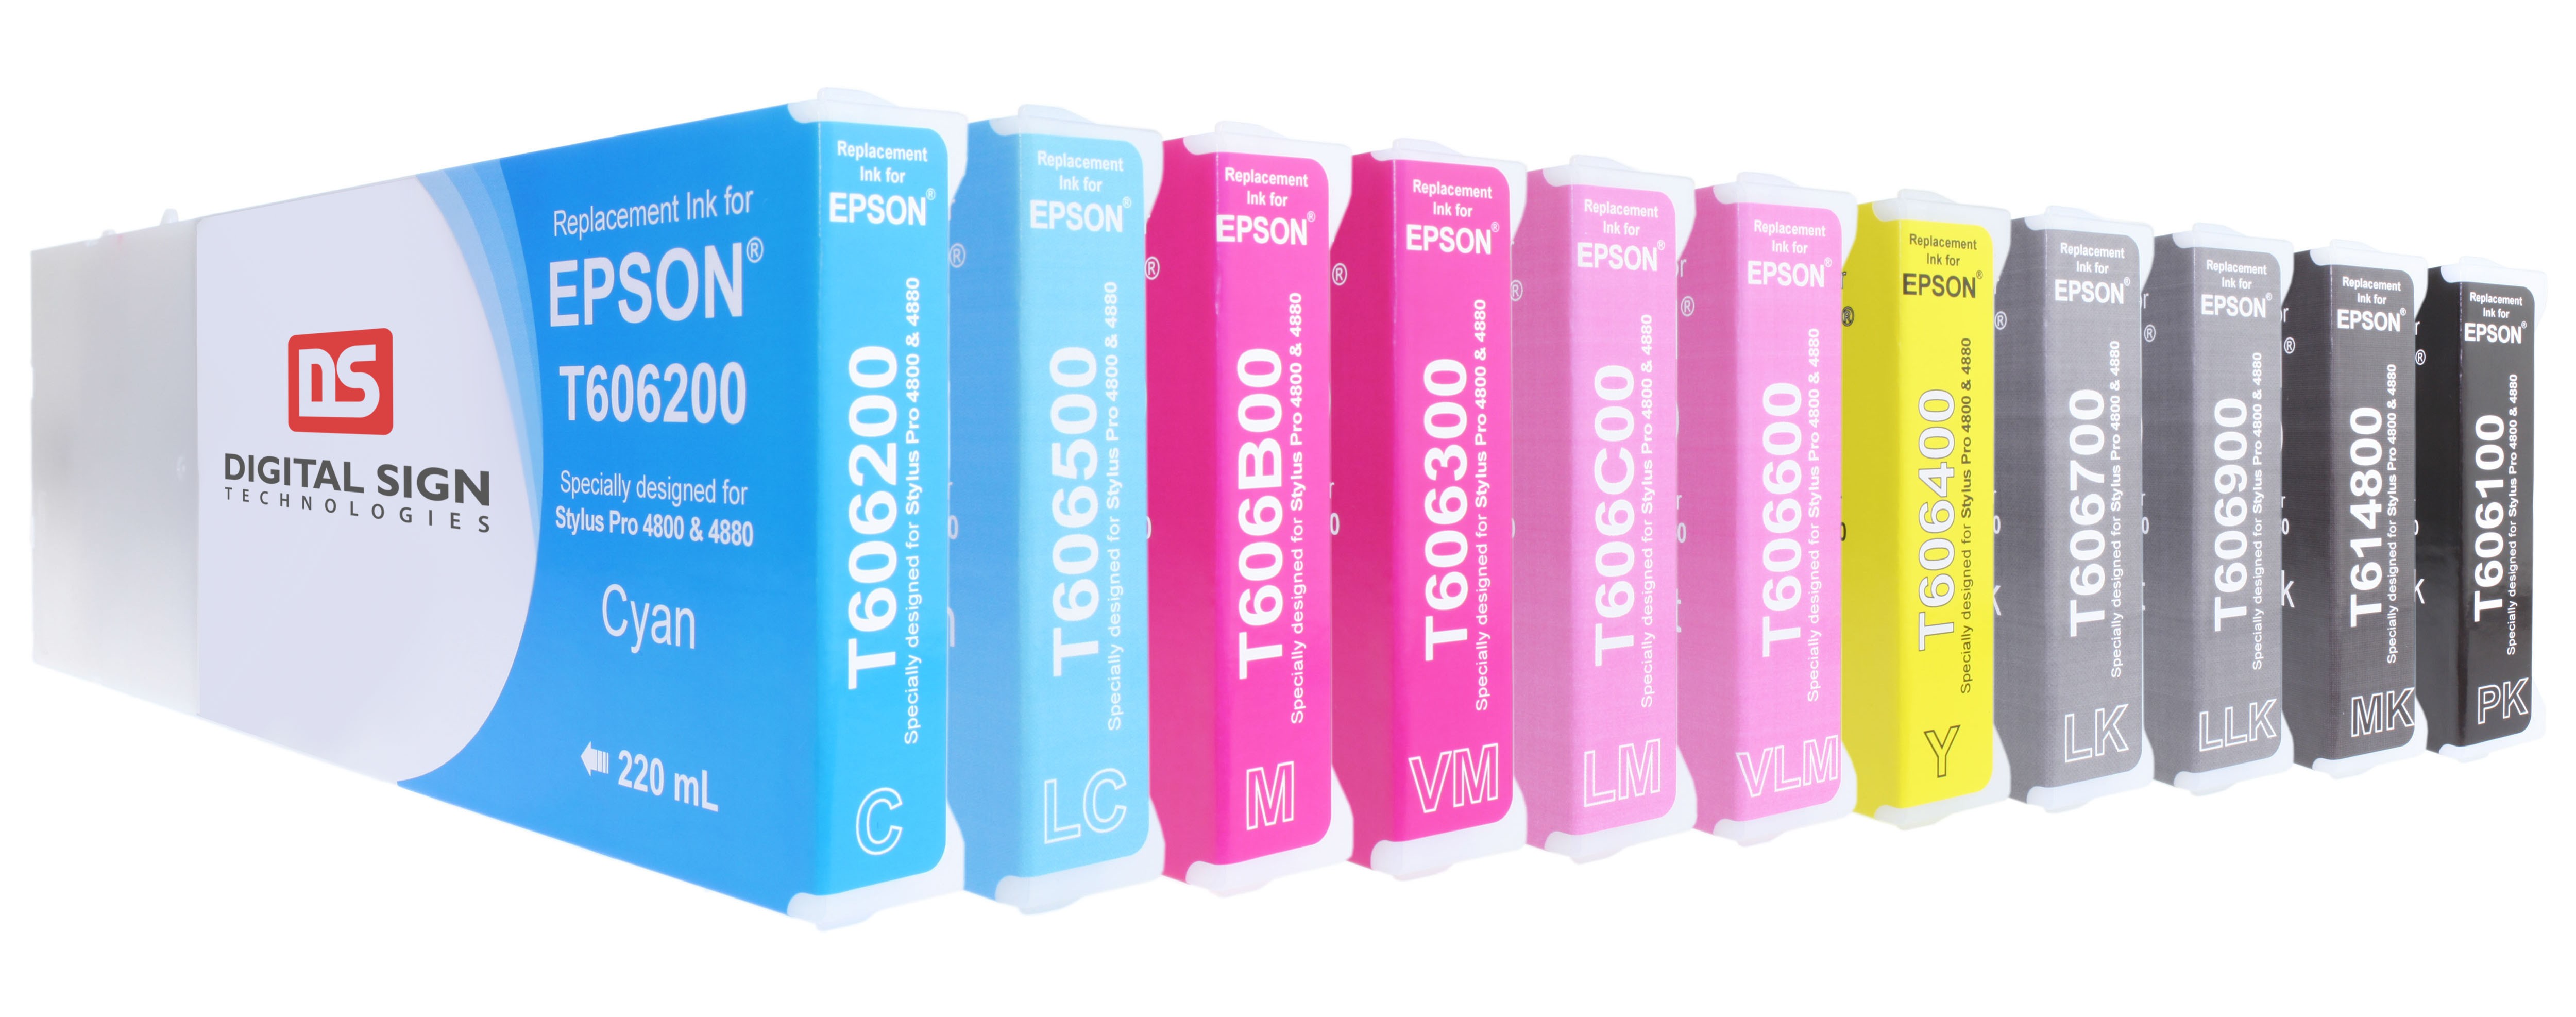 Epson UltraChrome K3 Ink Cartridges from DST